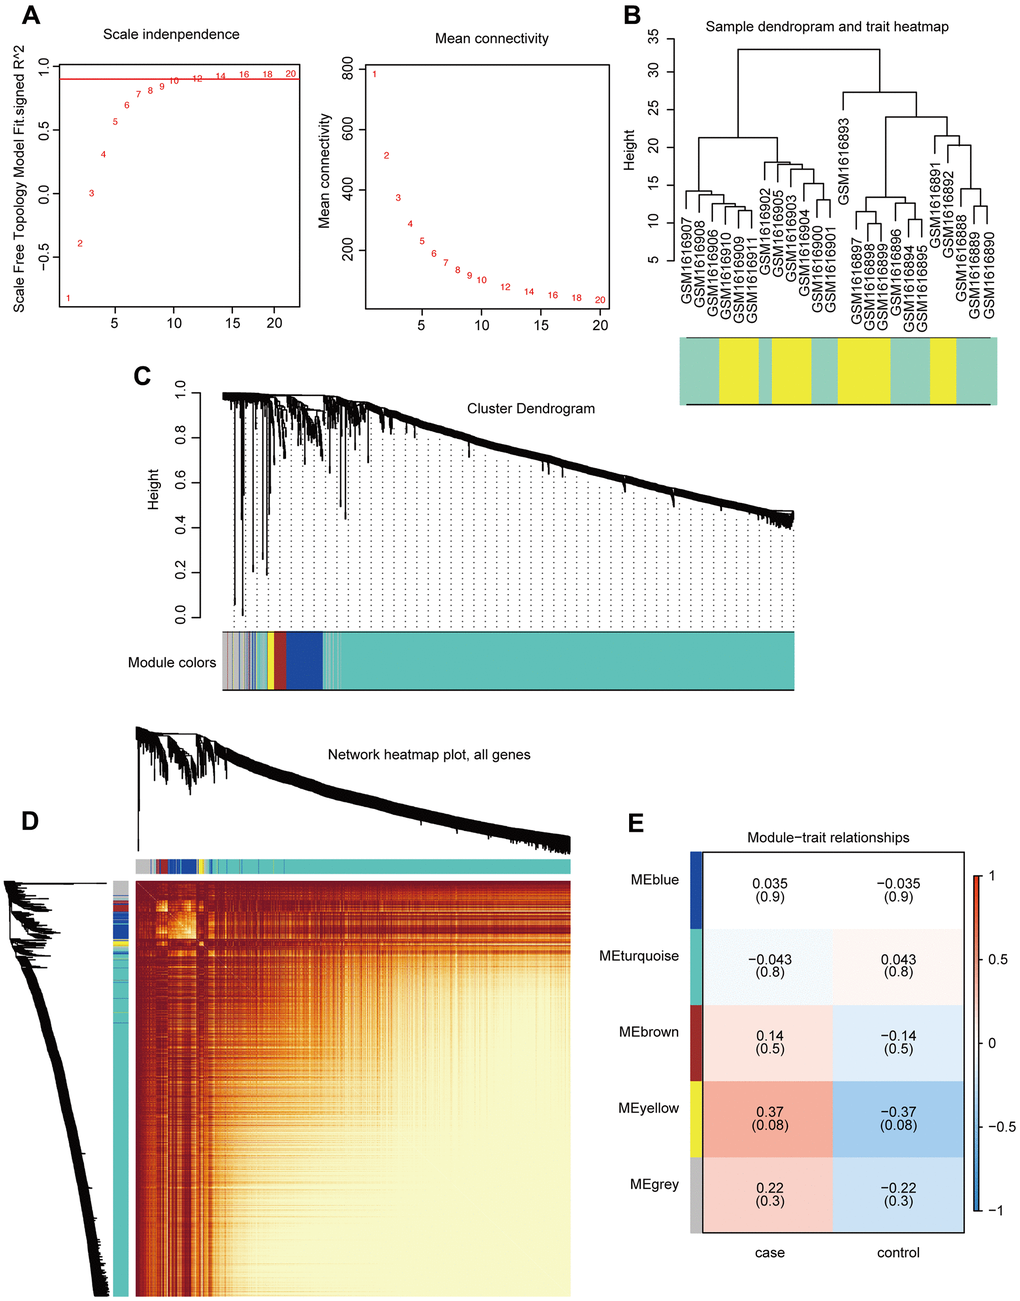 Construction and analysis of co-expression modules. (A) Optimal threshold selection map for breast cancer bone metastasis co-expression. (B) Clustering of breast cancer bone metastasis samples. (C) Phylogenetic tree of module clustering. (D) Co-expression analysis heat map. (E) Breast cancer bone metastasis modules and traits.